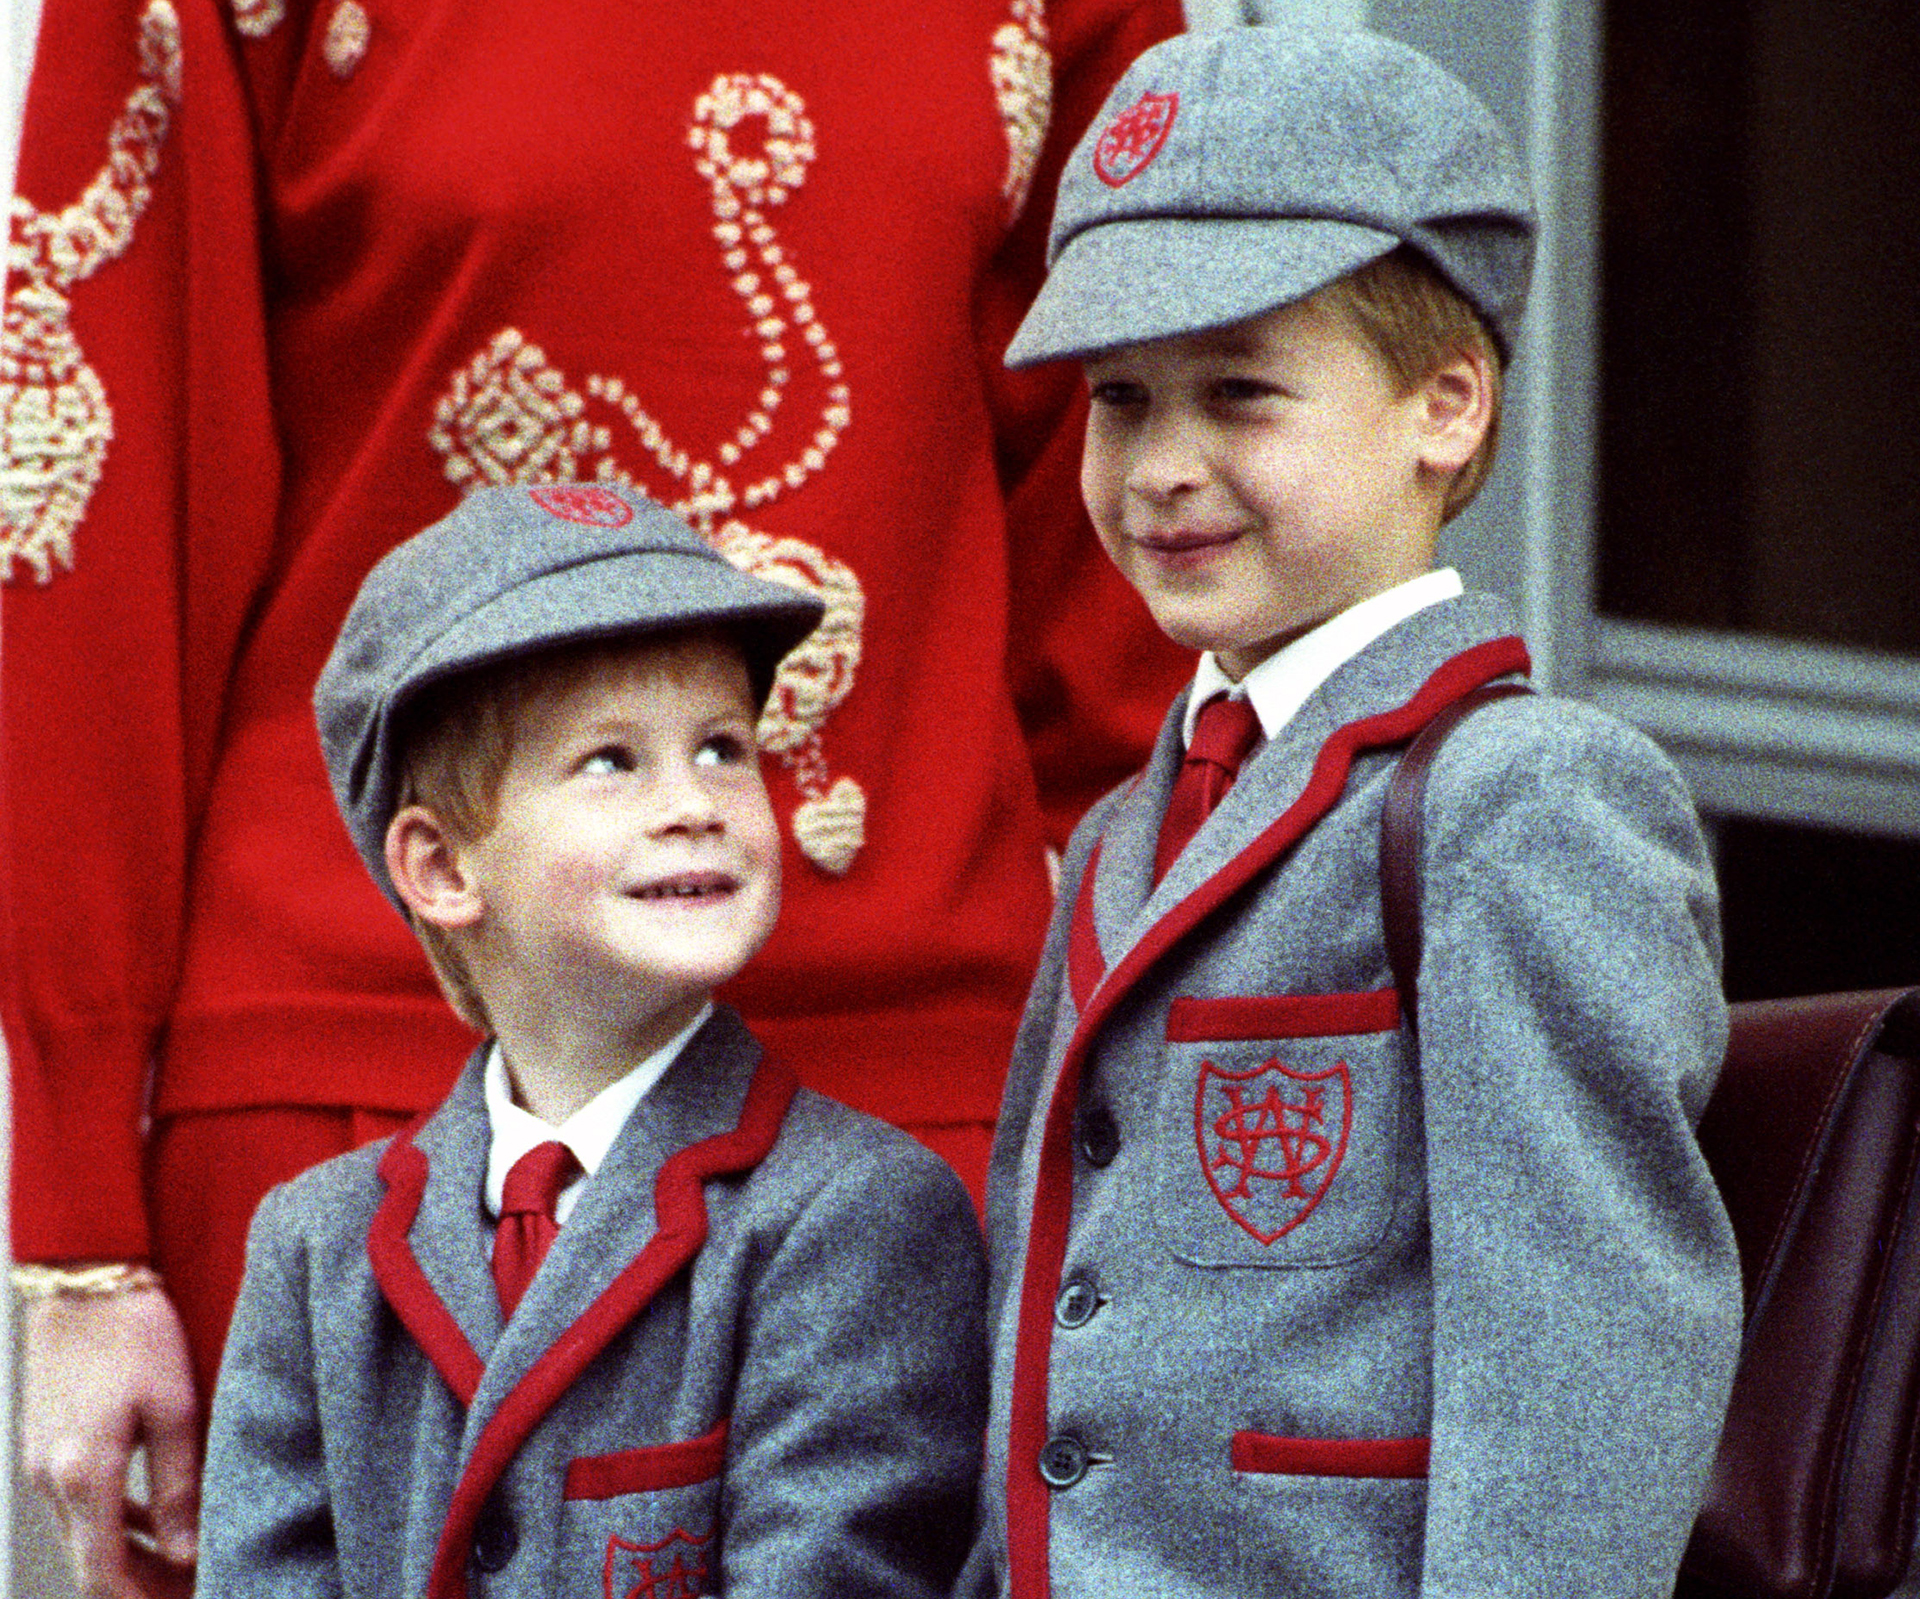 Brotherly love: Prince William and Prince Harry through the years